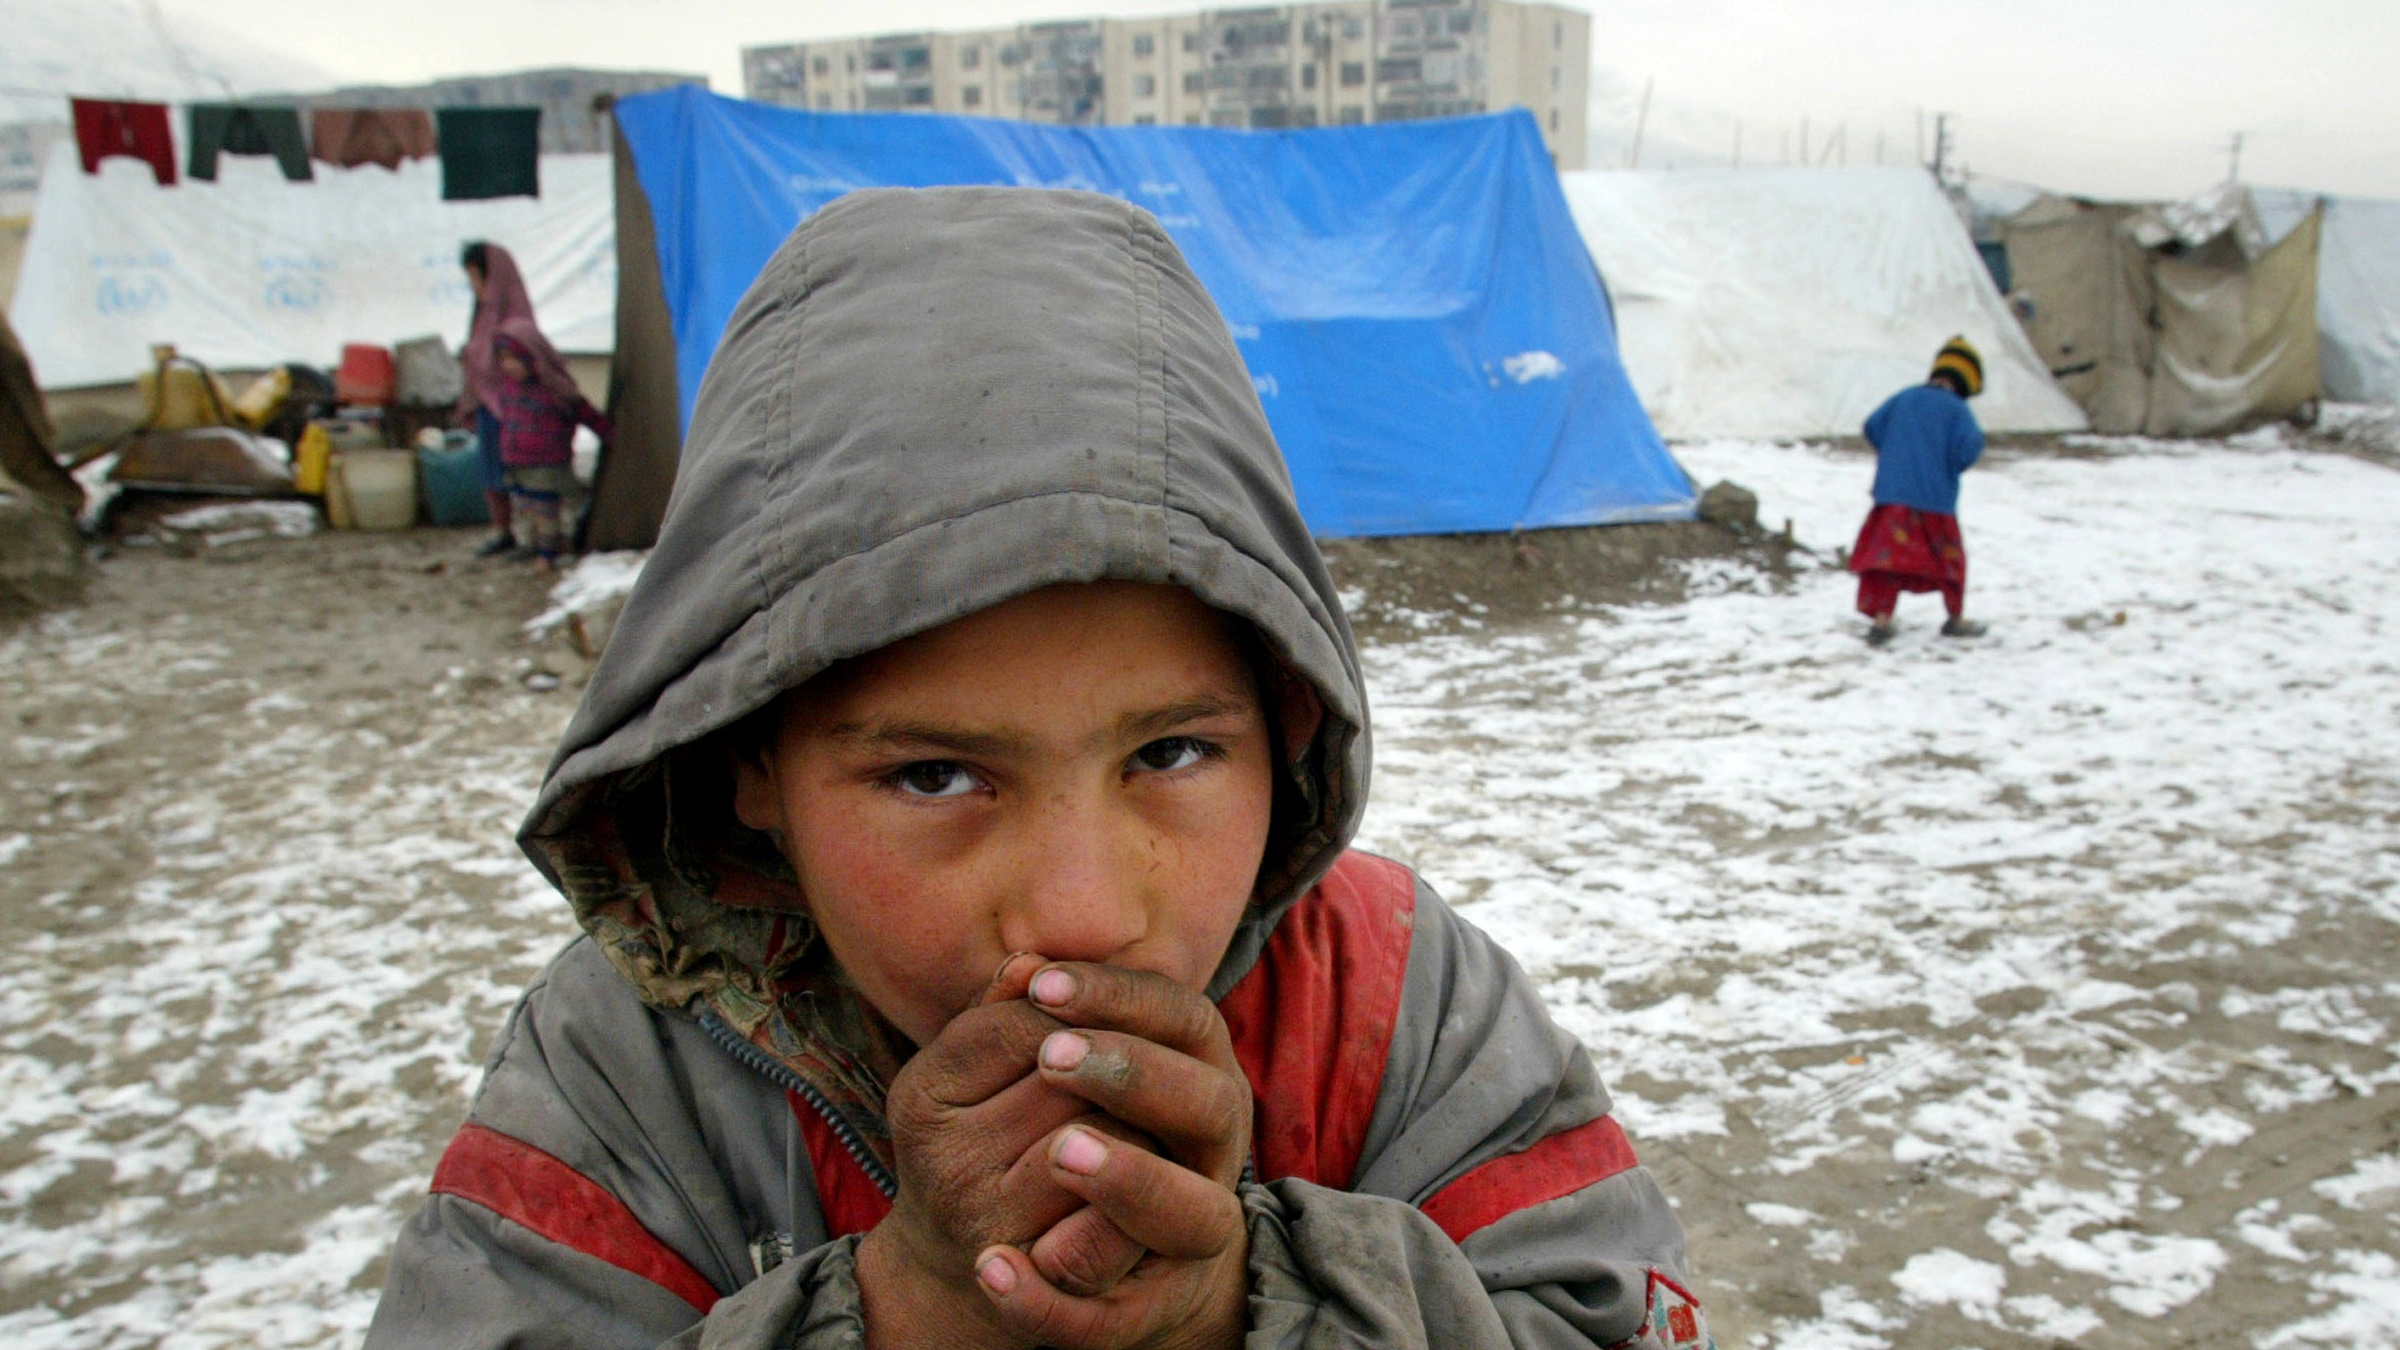 A child attempts to keep warm following snowfall outside Herat, Afghanistan